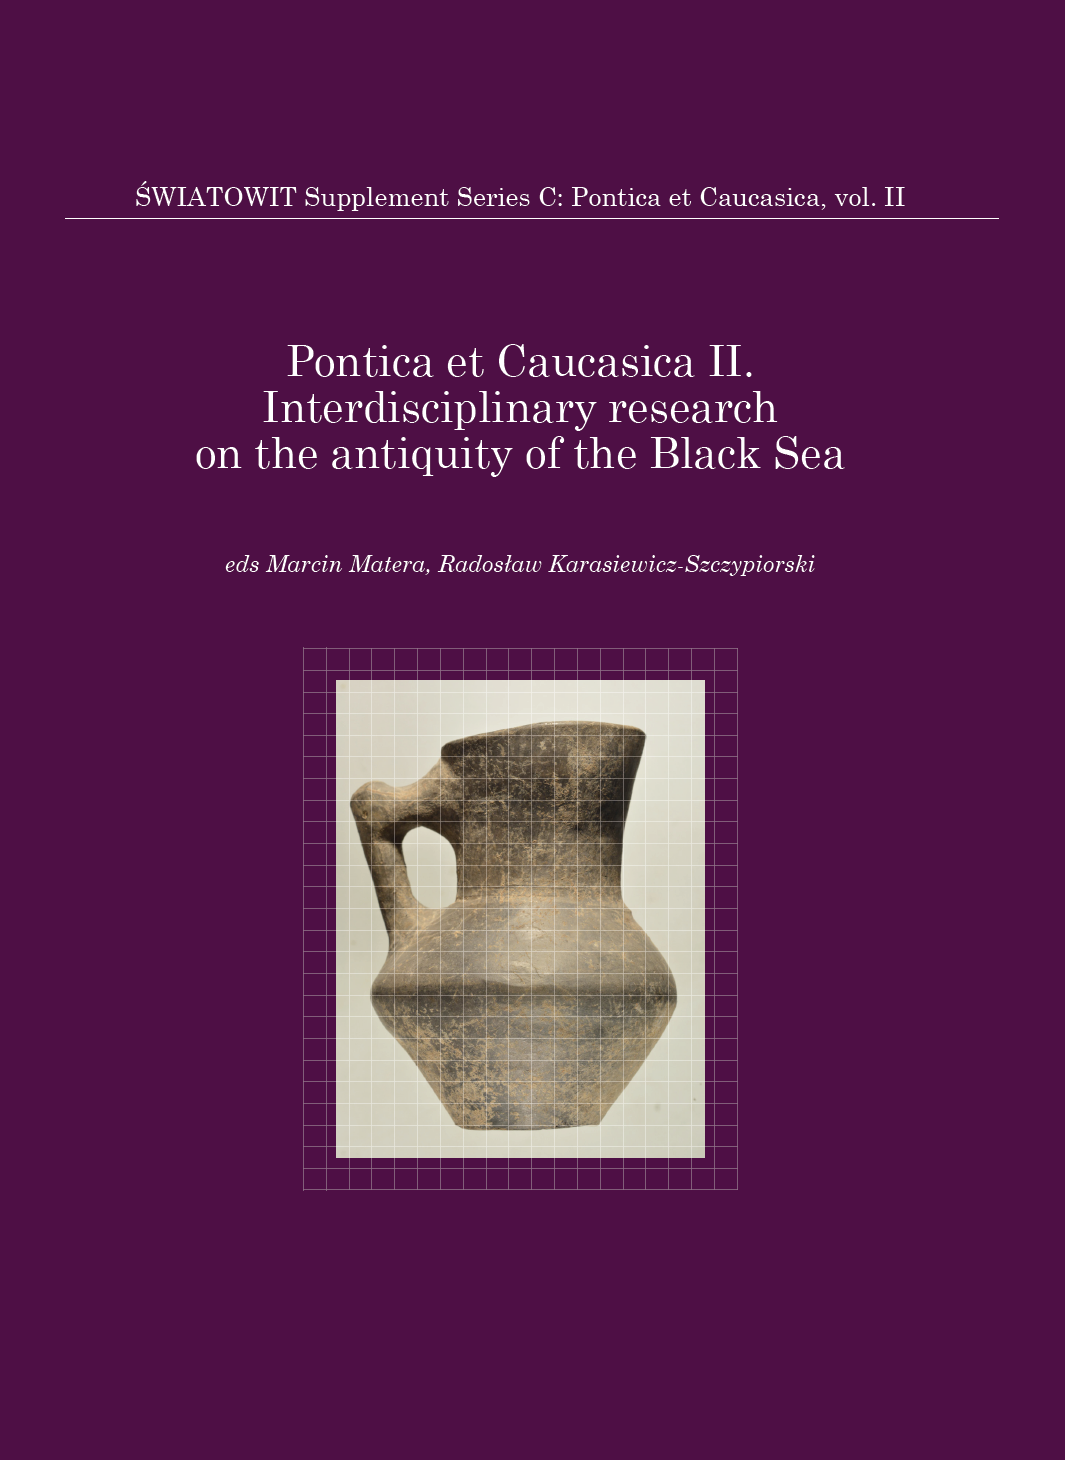 Interdisciplinary research on the antiquity of the Black Sea. Volume II Cover Image